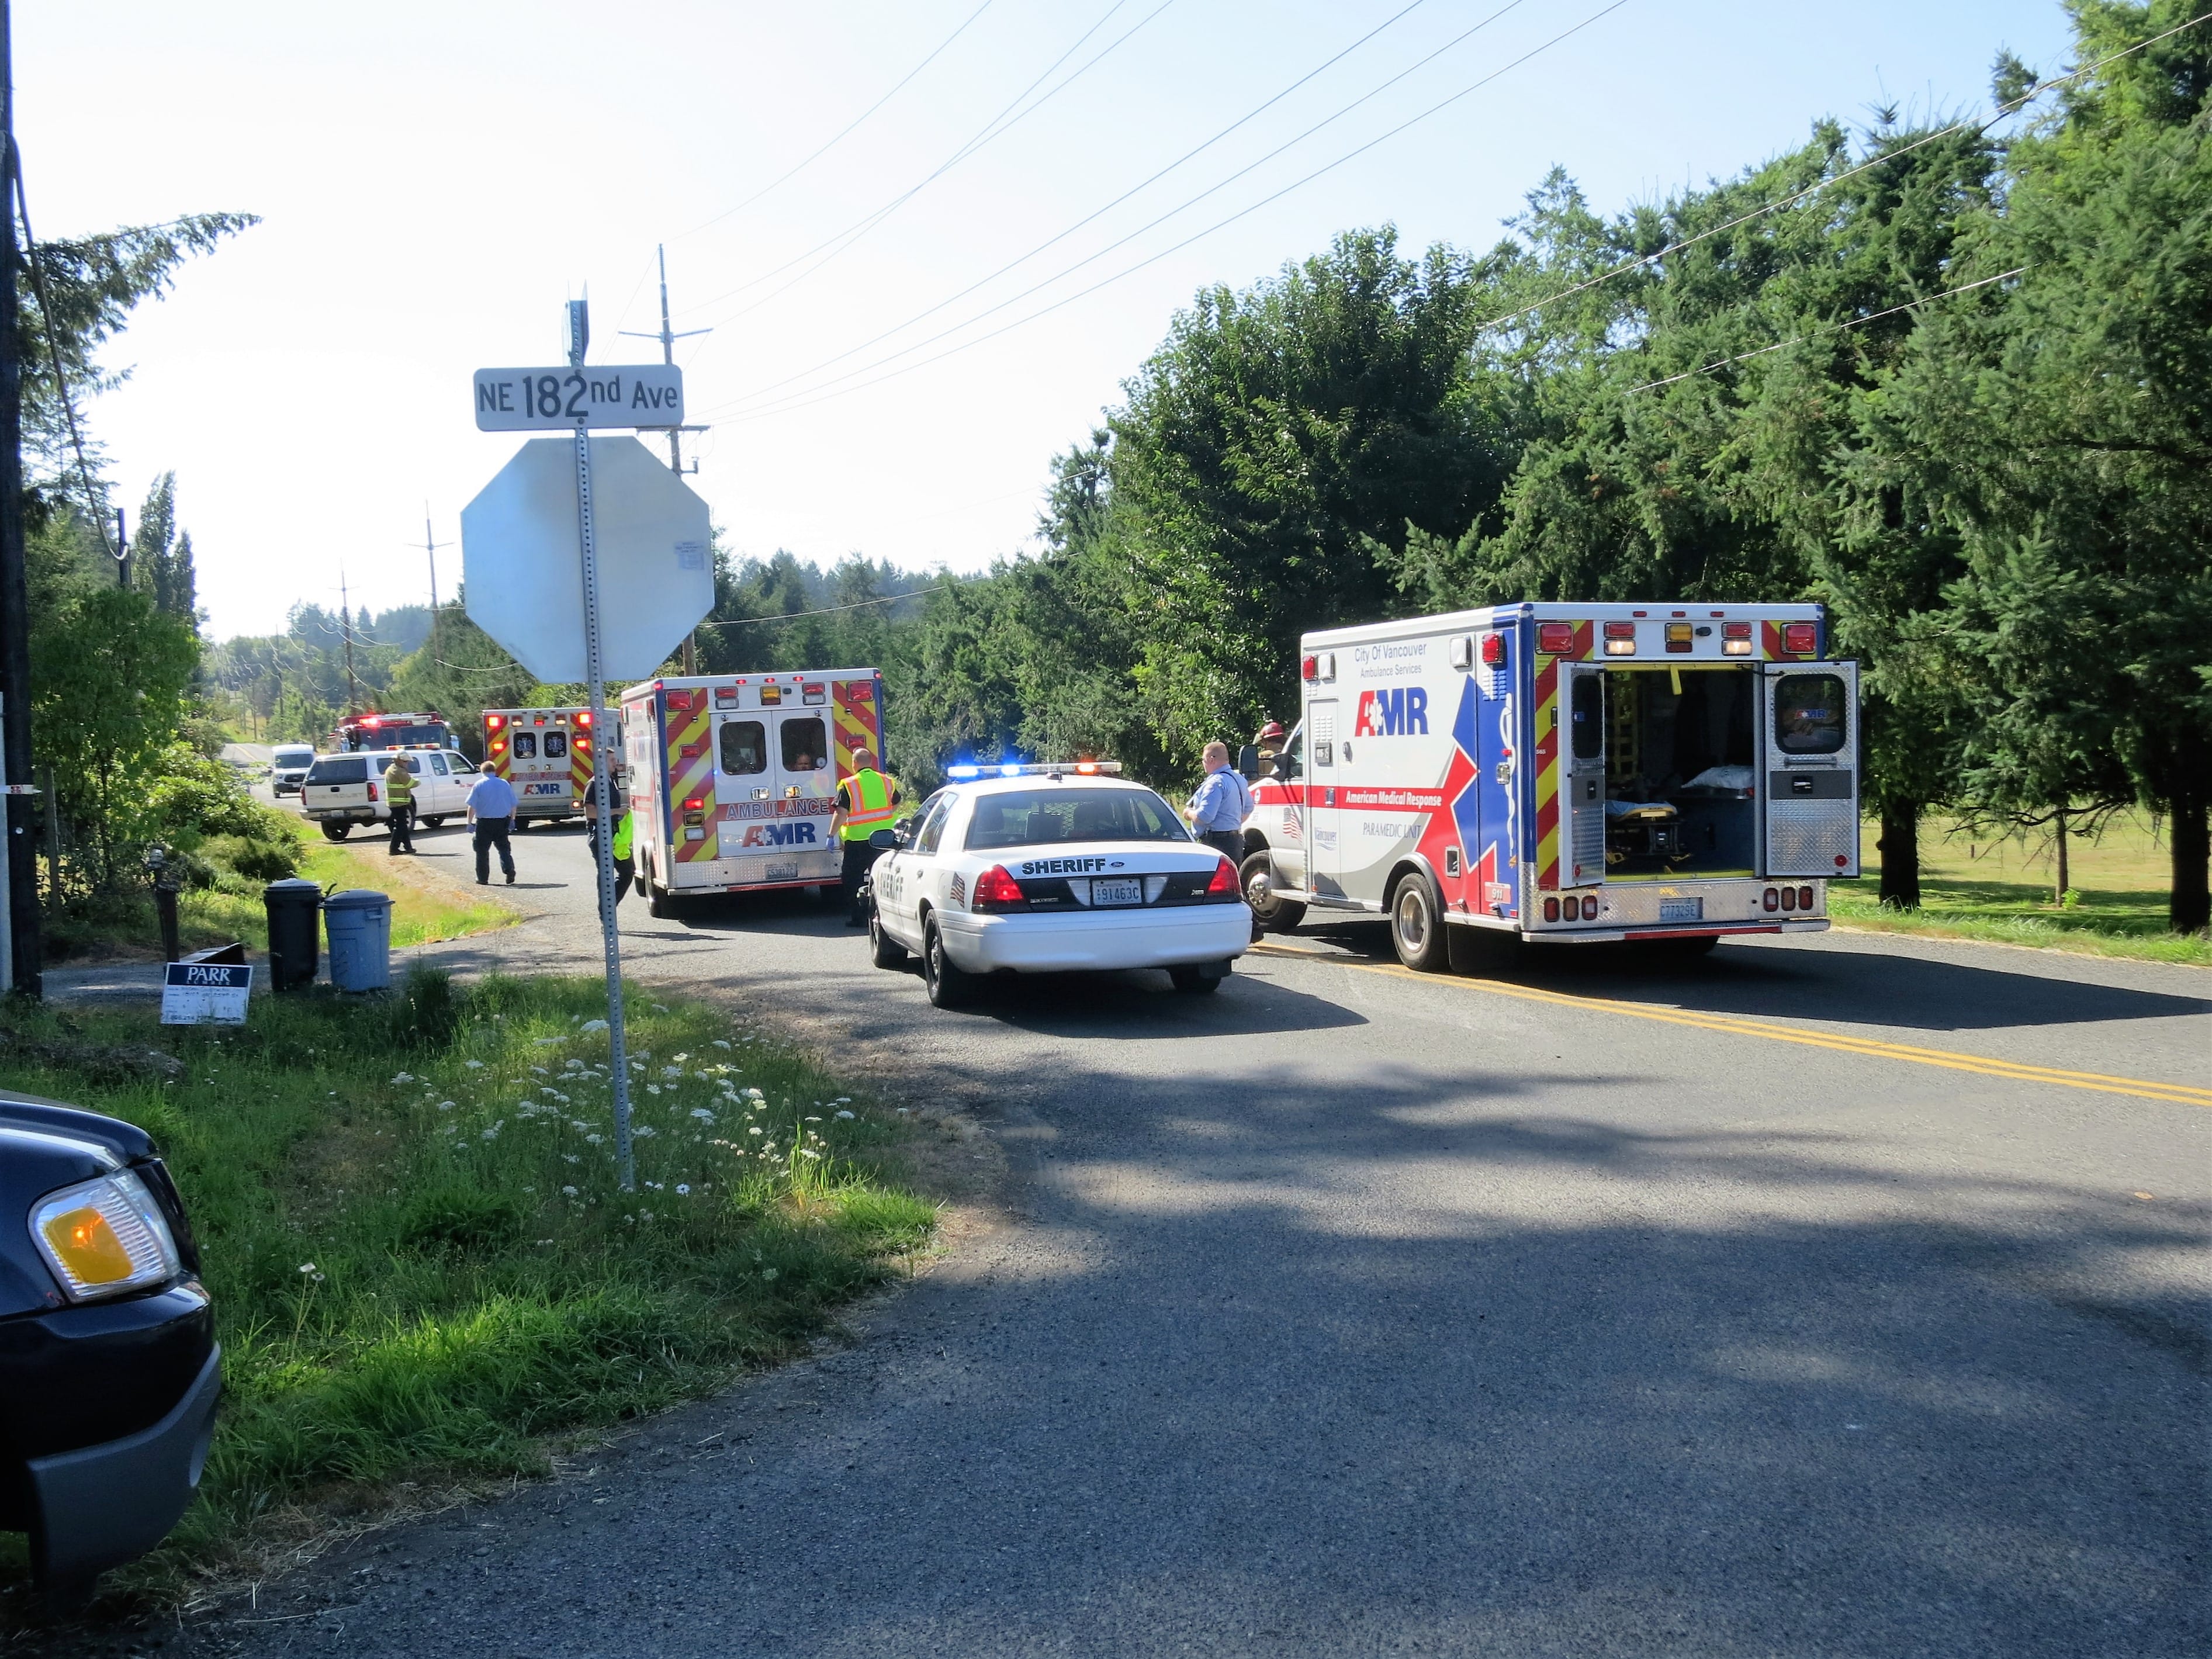 Three people were seriously hurt in a T-bone crash Wednesday afternoon near Battle Ground Lake.